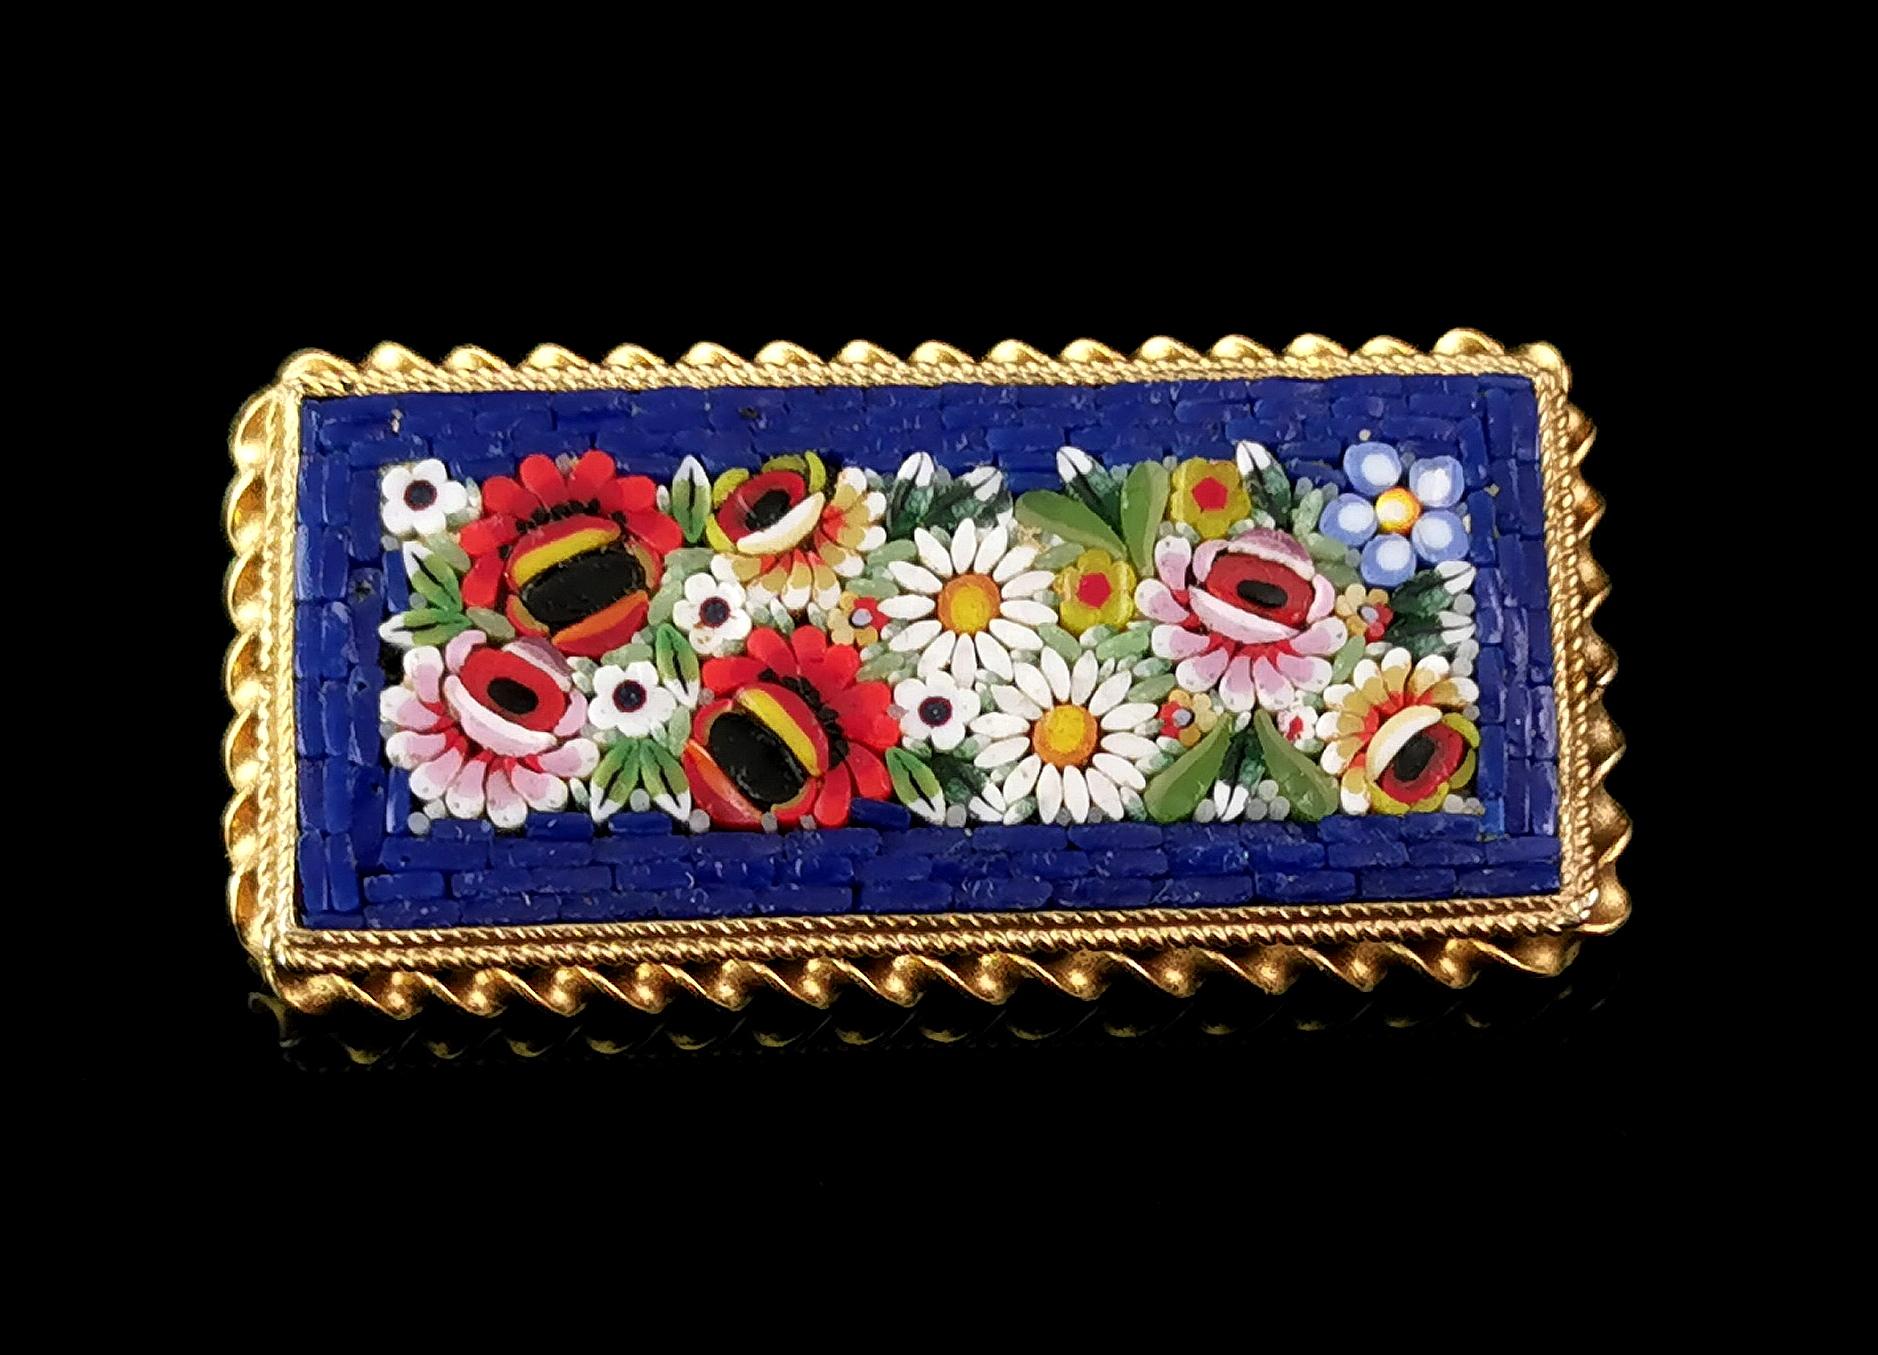 A beautiful vintage c1940s Micro Mosaic brooch.

Painstakingly created in Italy from many tiny of pieces of ceramic and laid out in a pretty floral design with a rich royal blue border.

The micro mosaic is set into a rectangular shaped gold tone